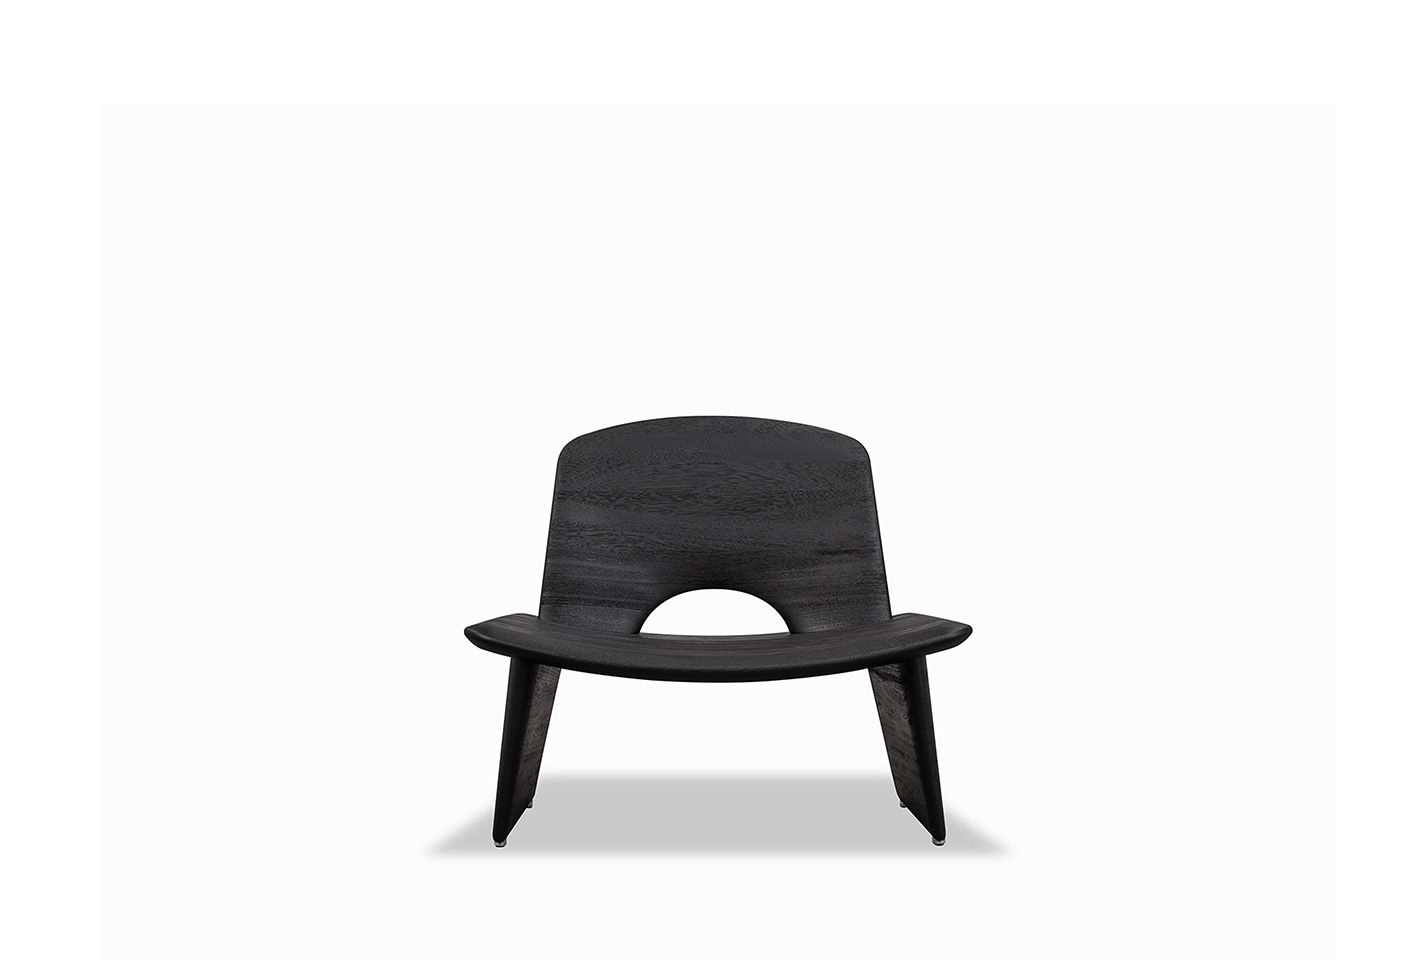 The Hakuna Matata outdoor armchair in iroko black by by Roberto Lazzeroni for Baxter. Photo c/o Baxter.